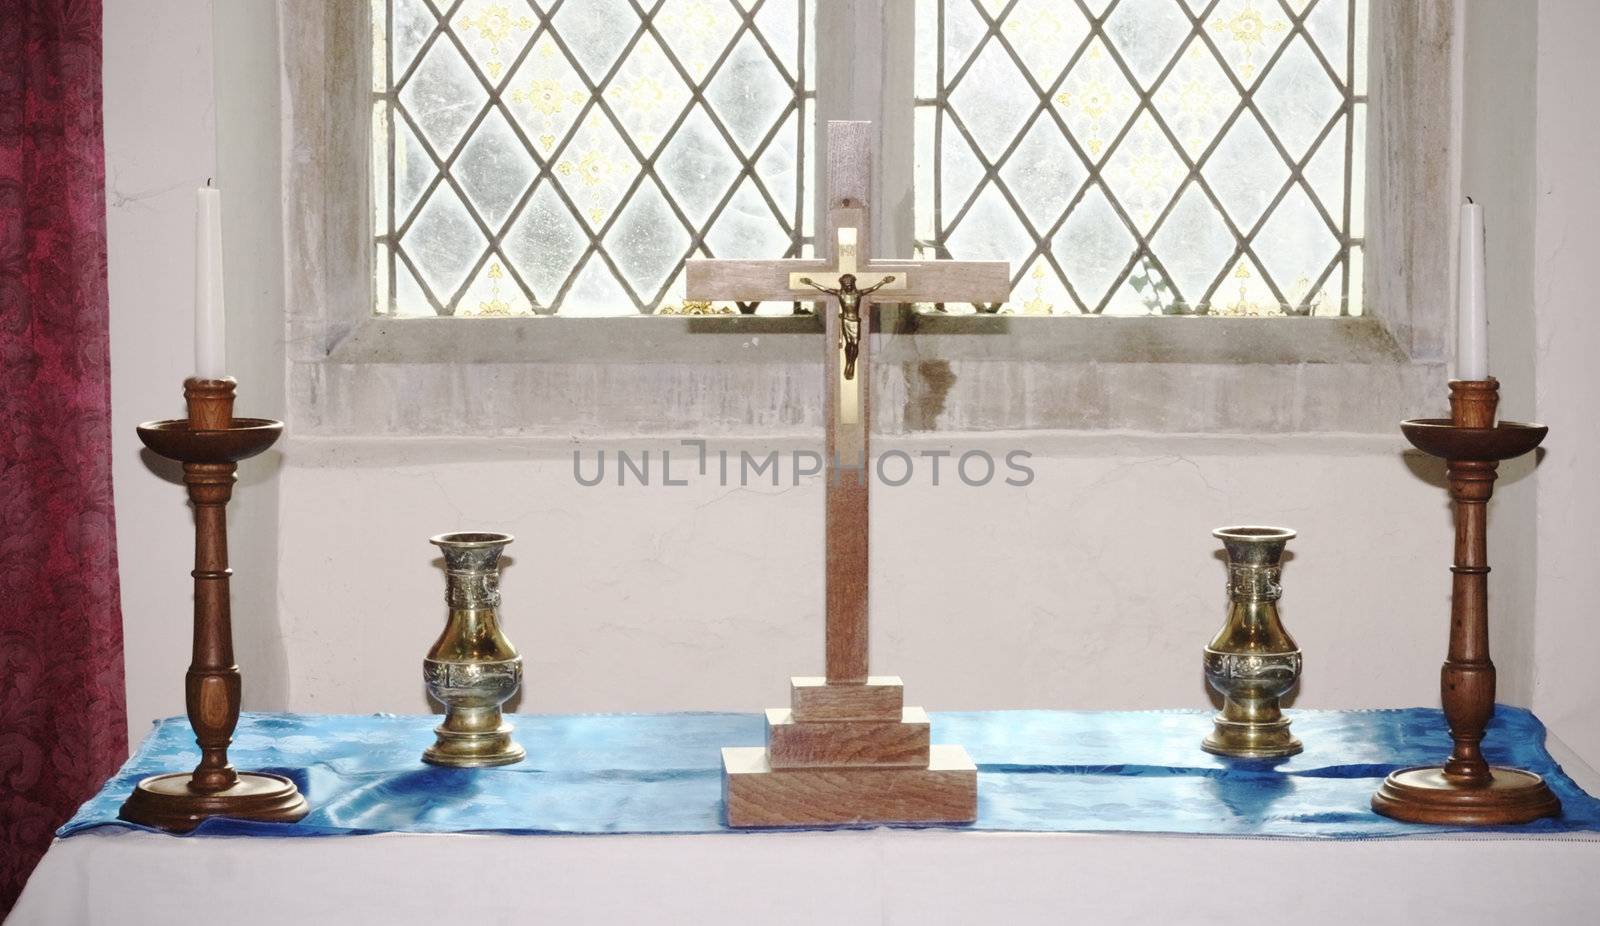 Lent Altar (no flowers) in English country church Godington, Oxfordshire